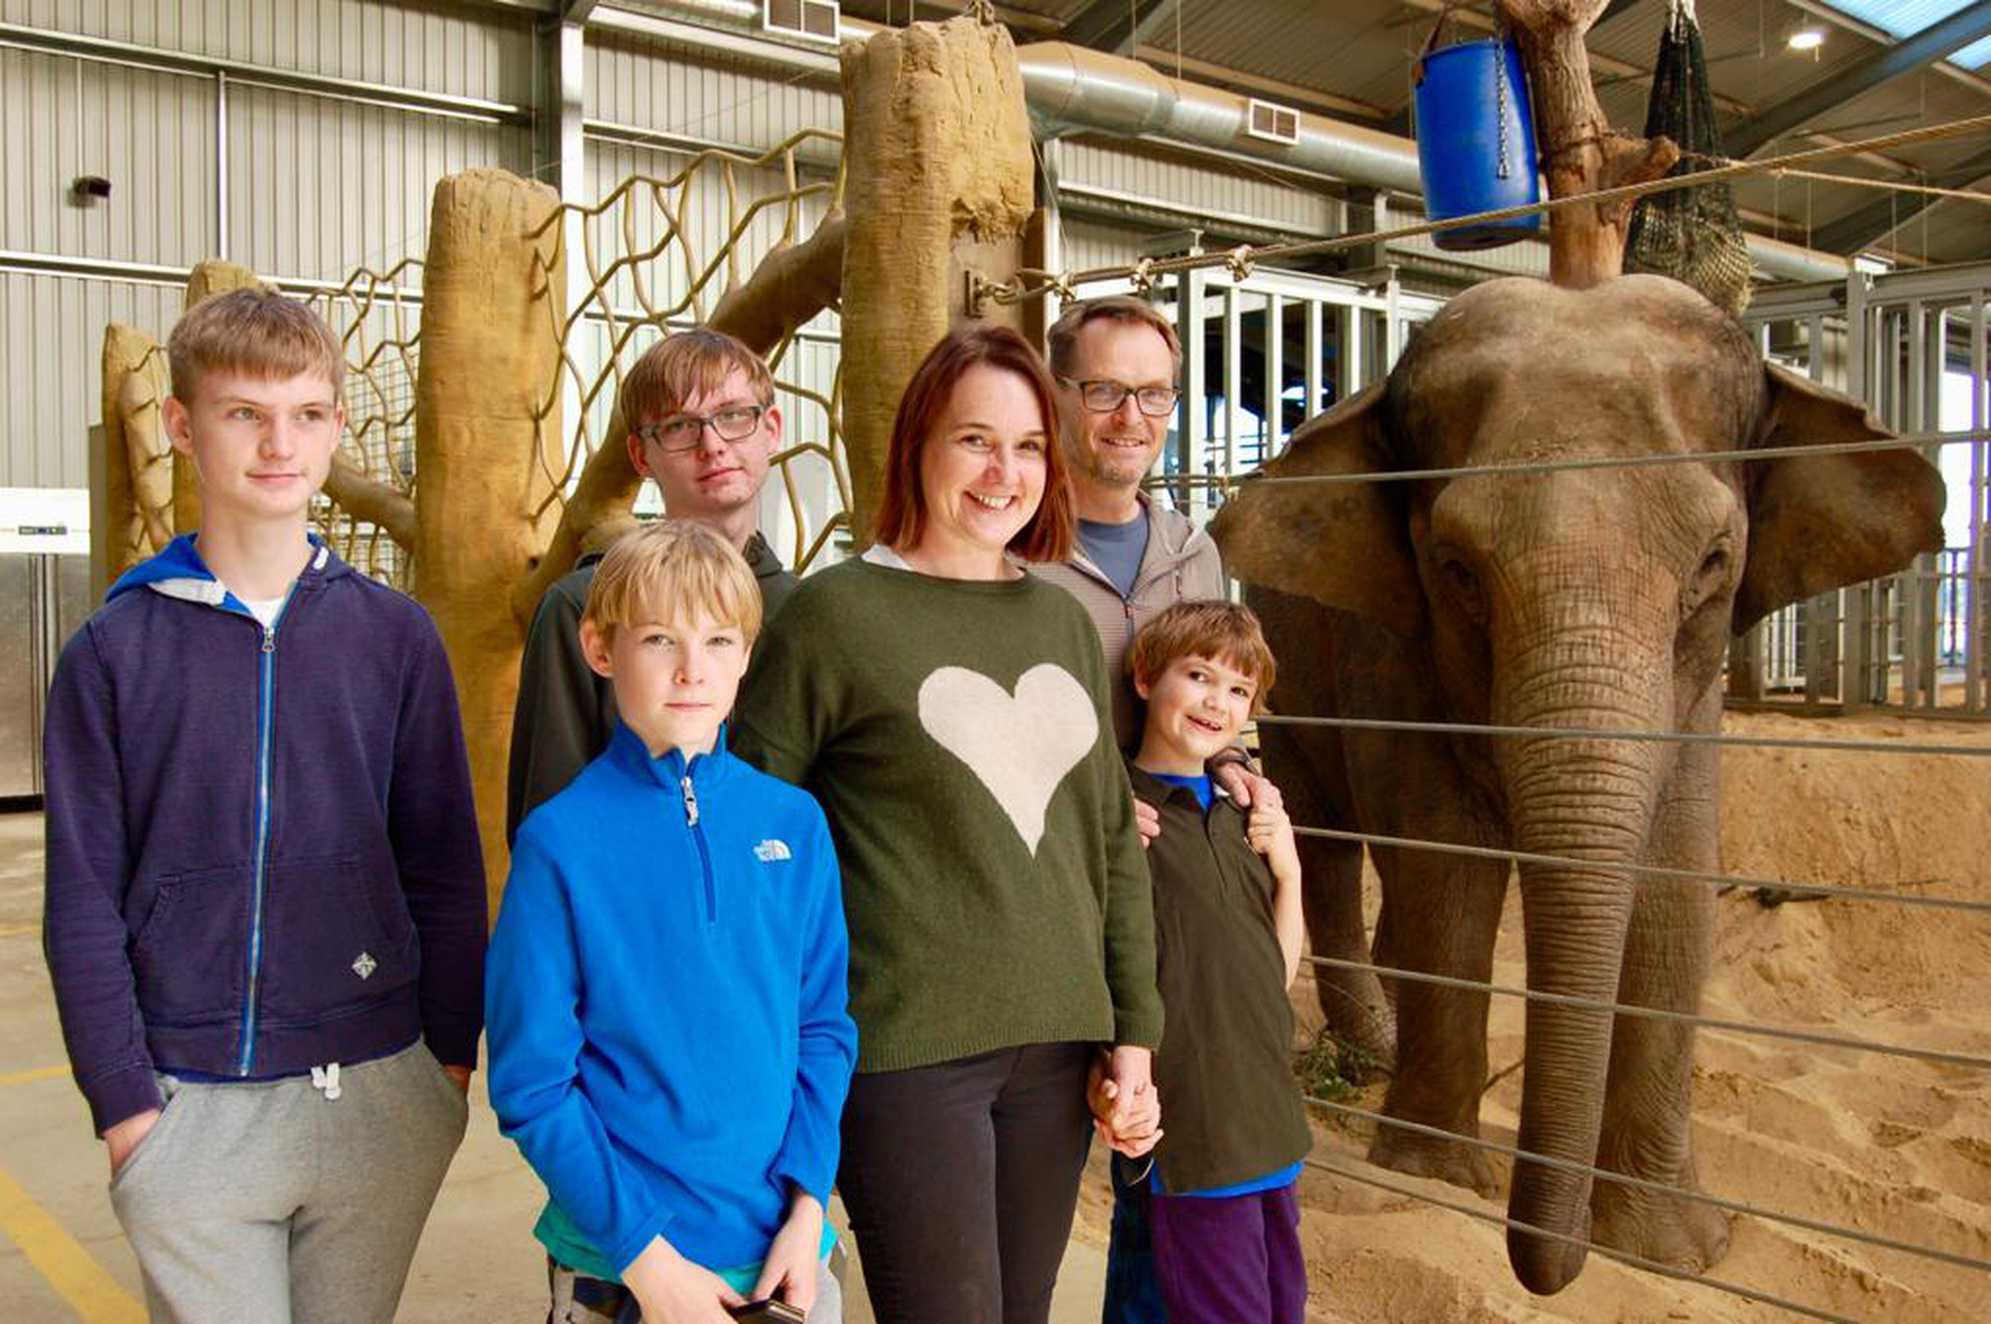 Florence and her family with an elephant